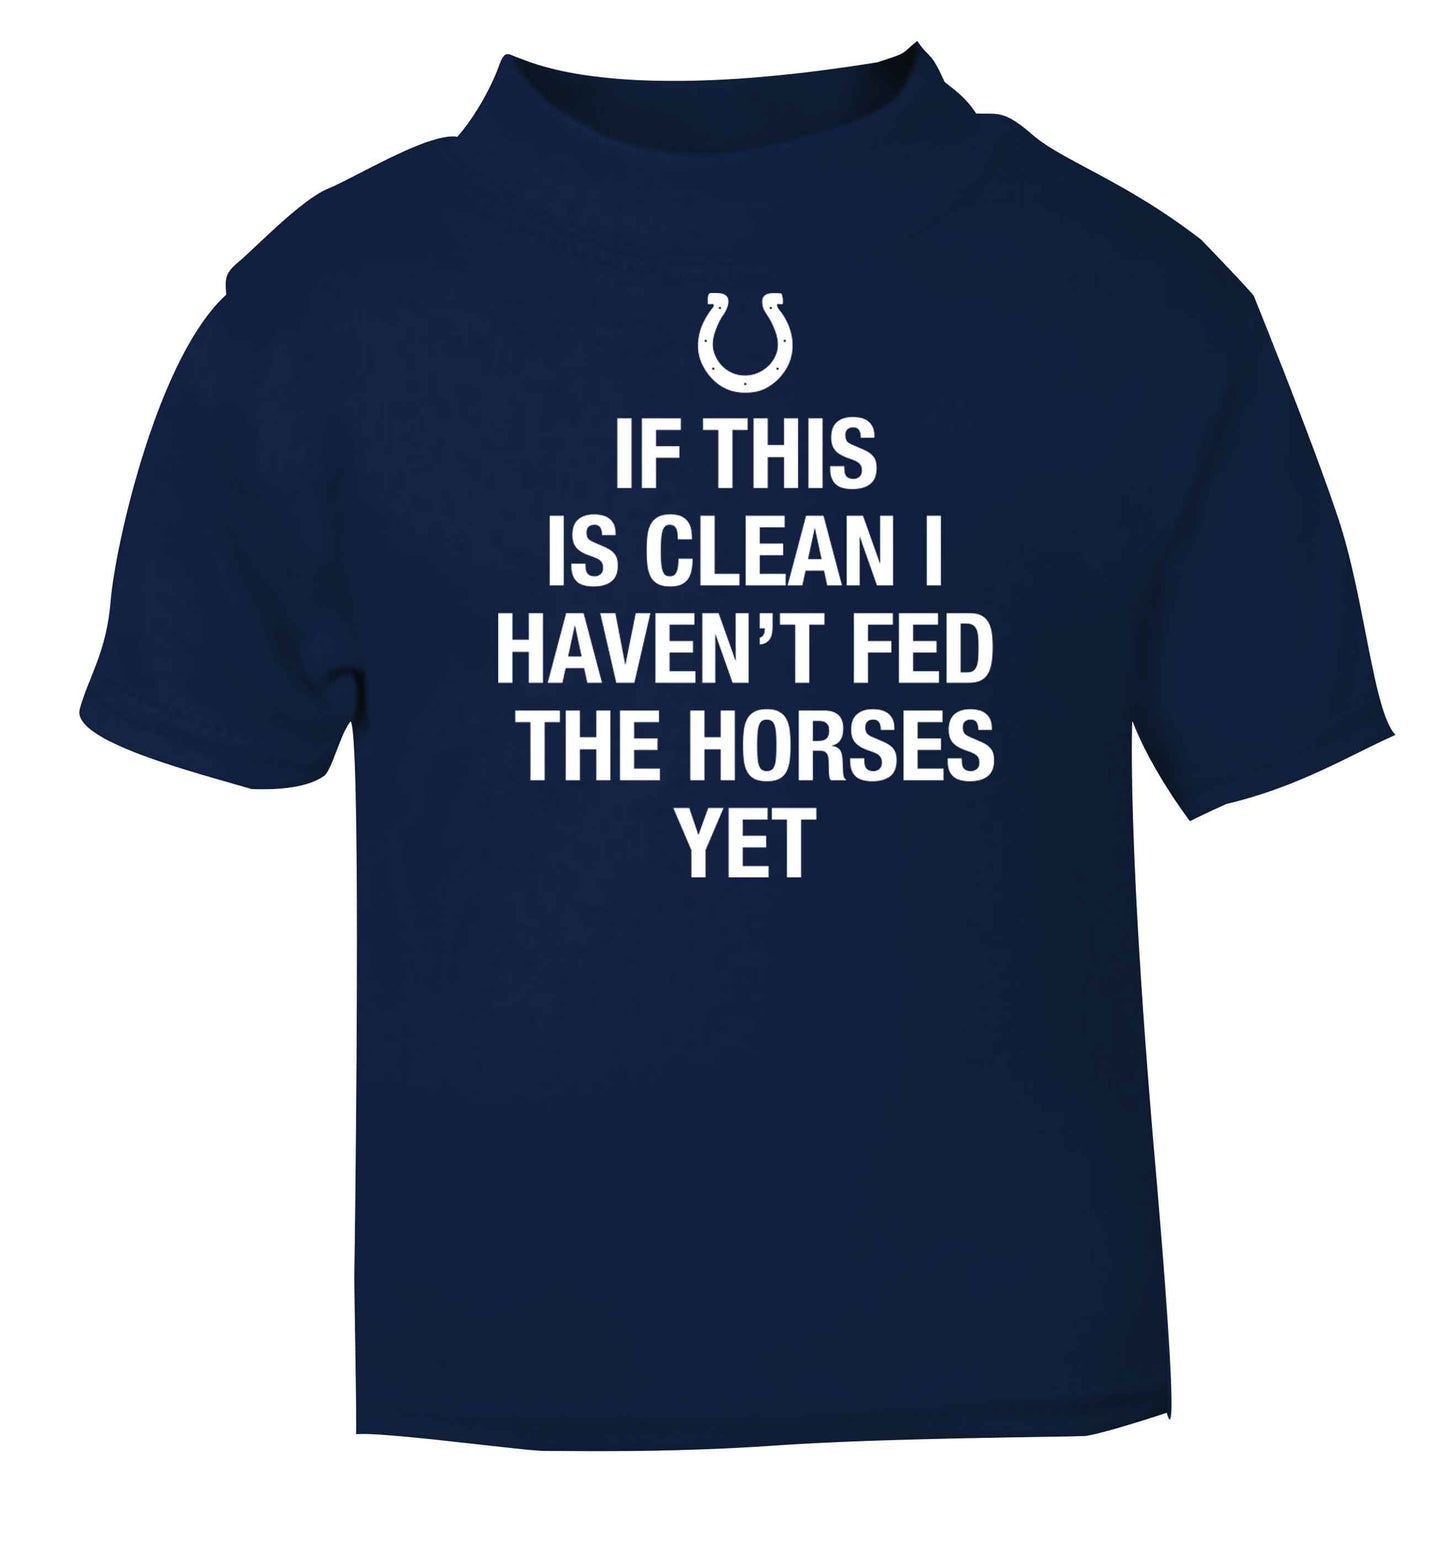 If this isn't clean I haven't fed the horses yet navy baby toddler Tshirt 2 Years